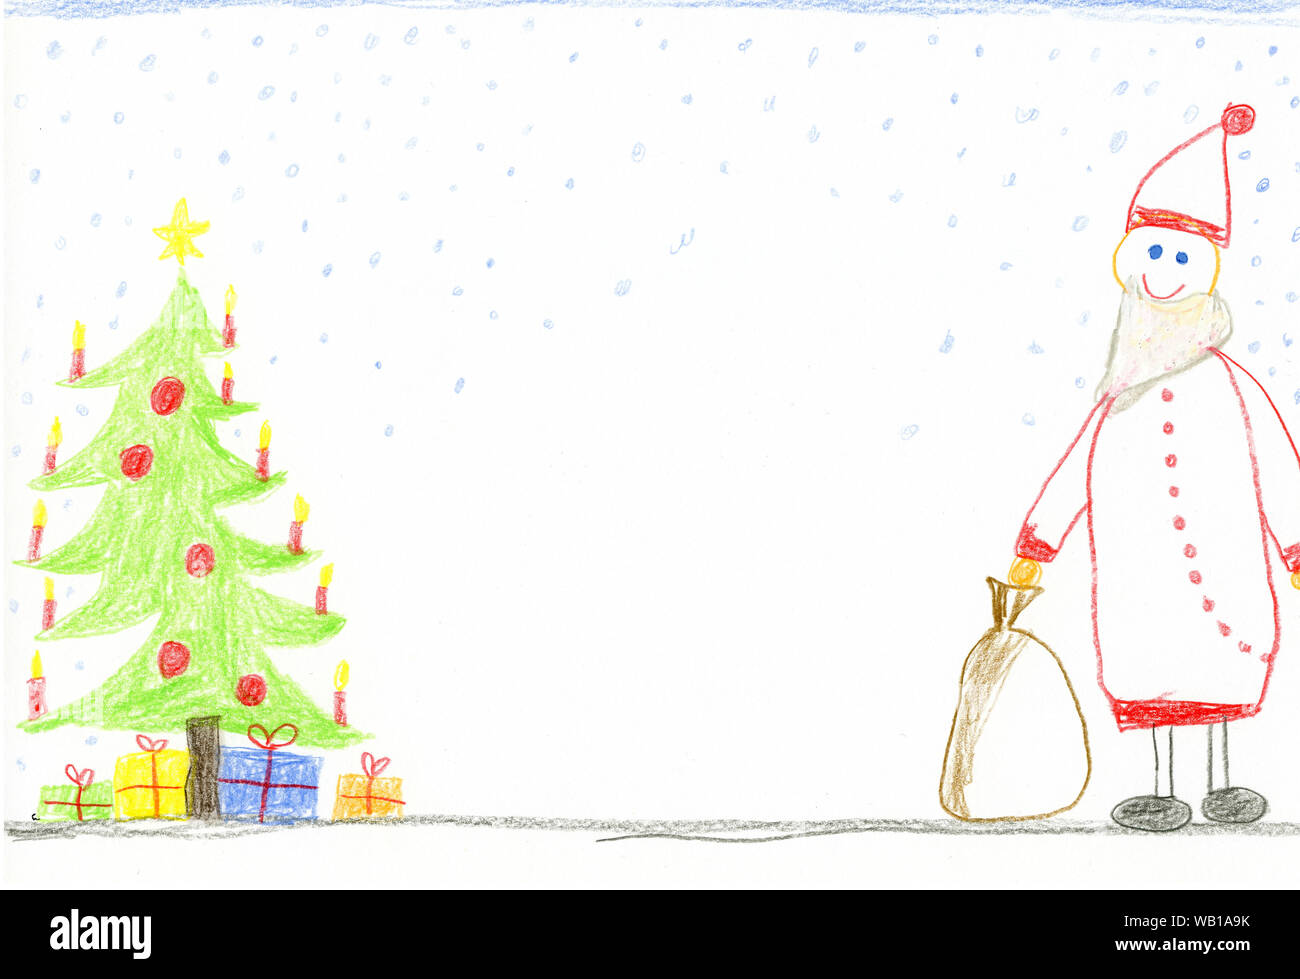 Childrens Drawing With Decorated Christmas Tree Presents